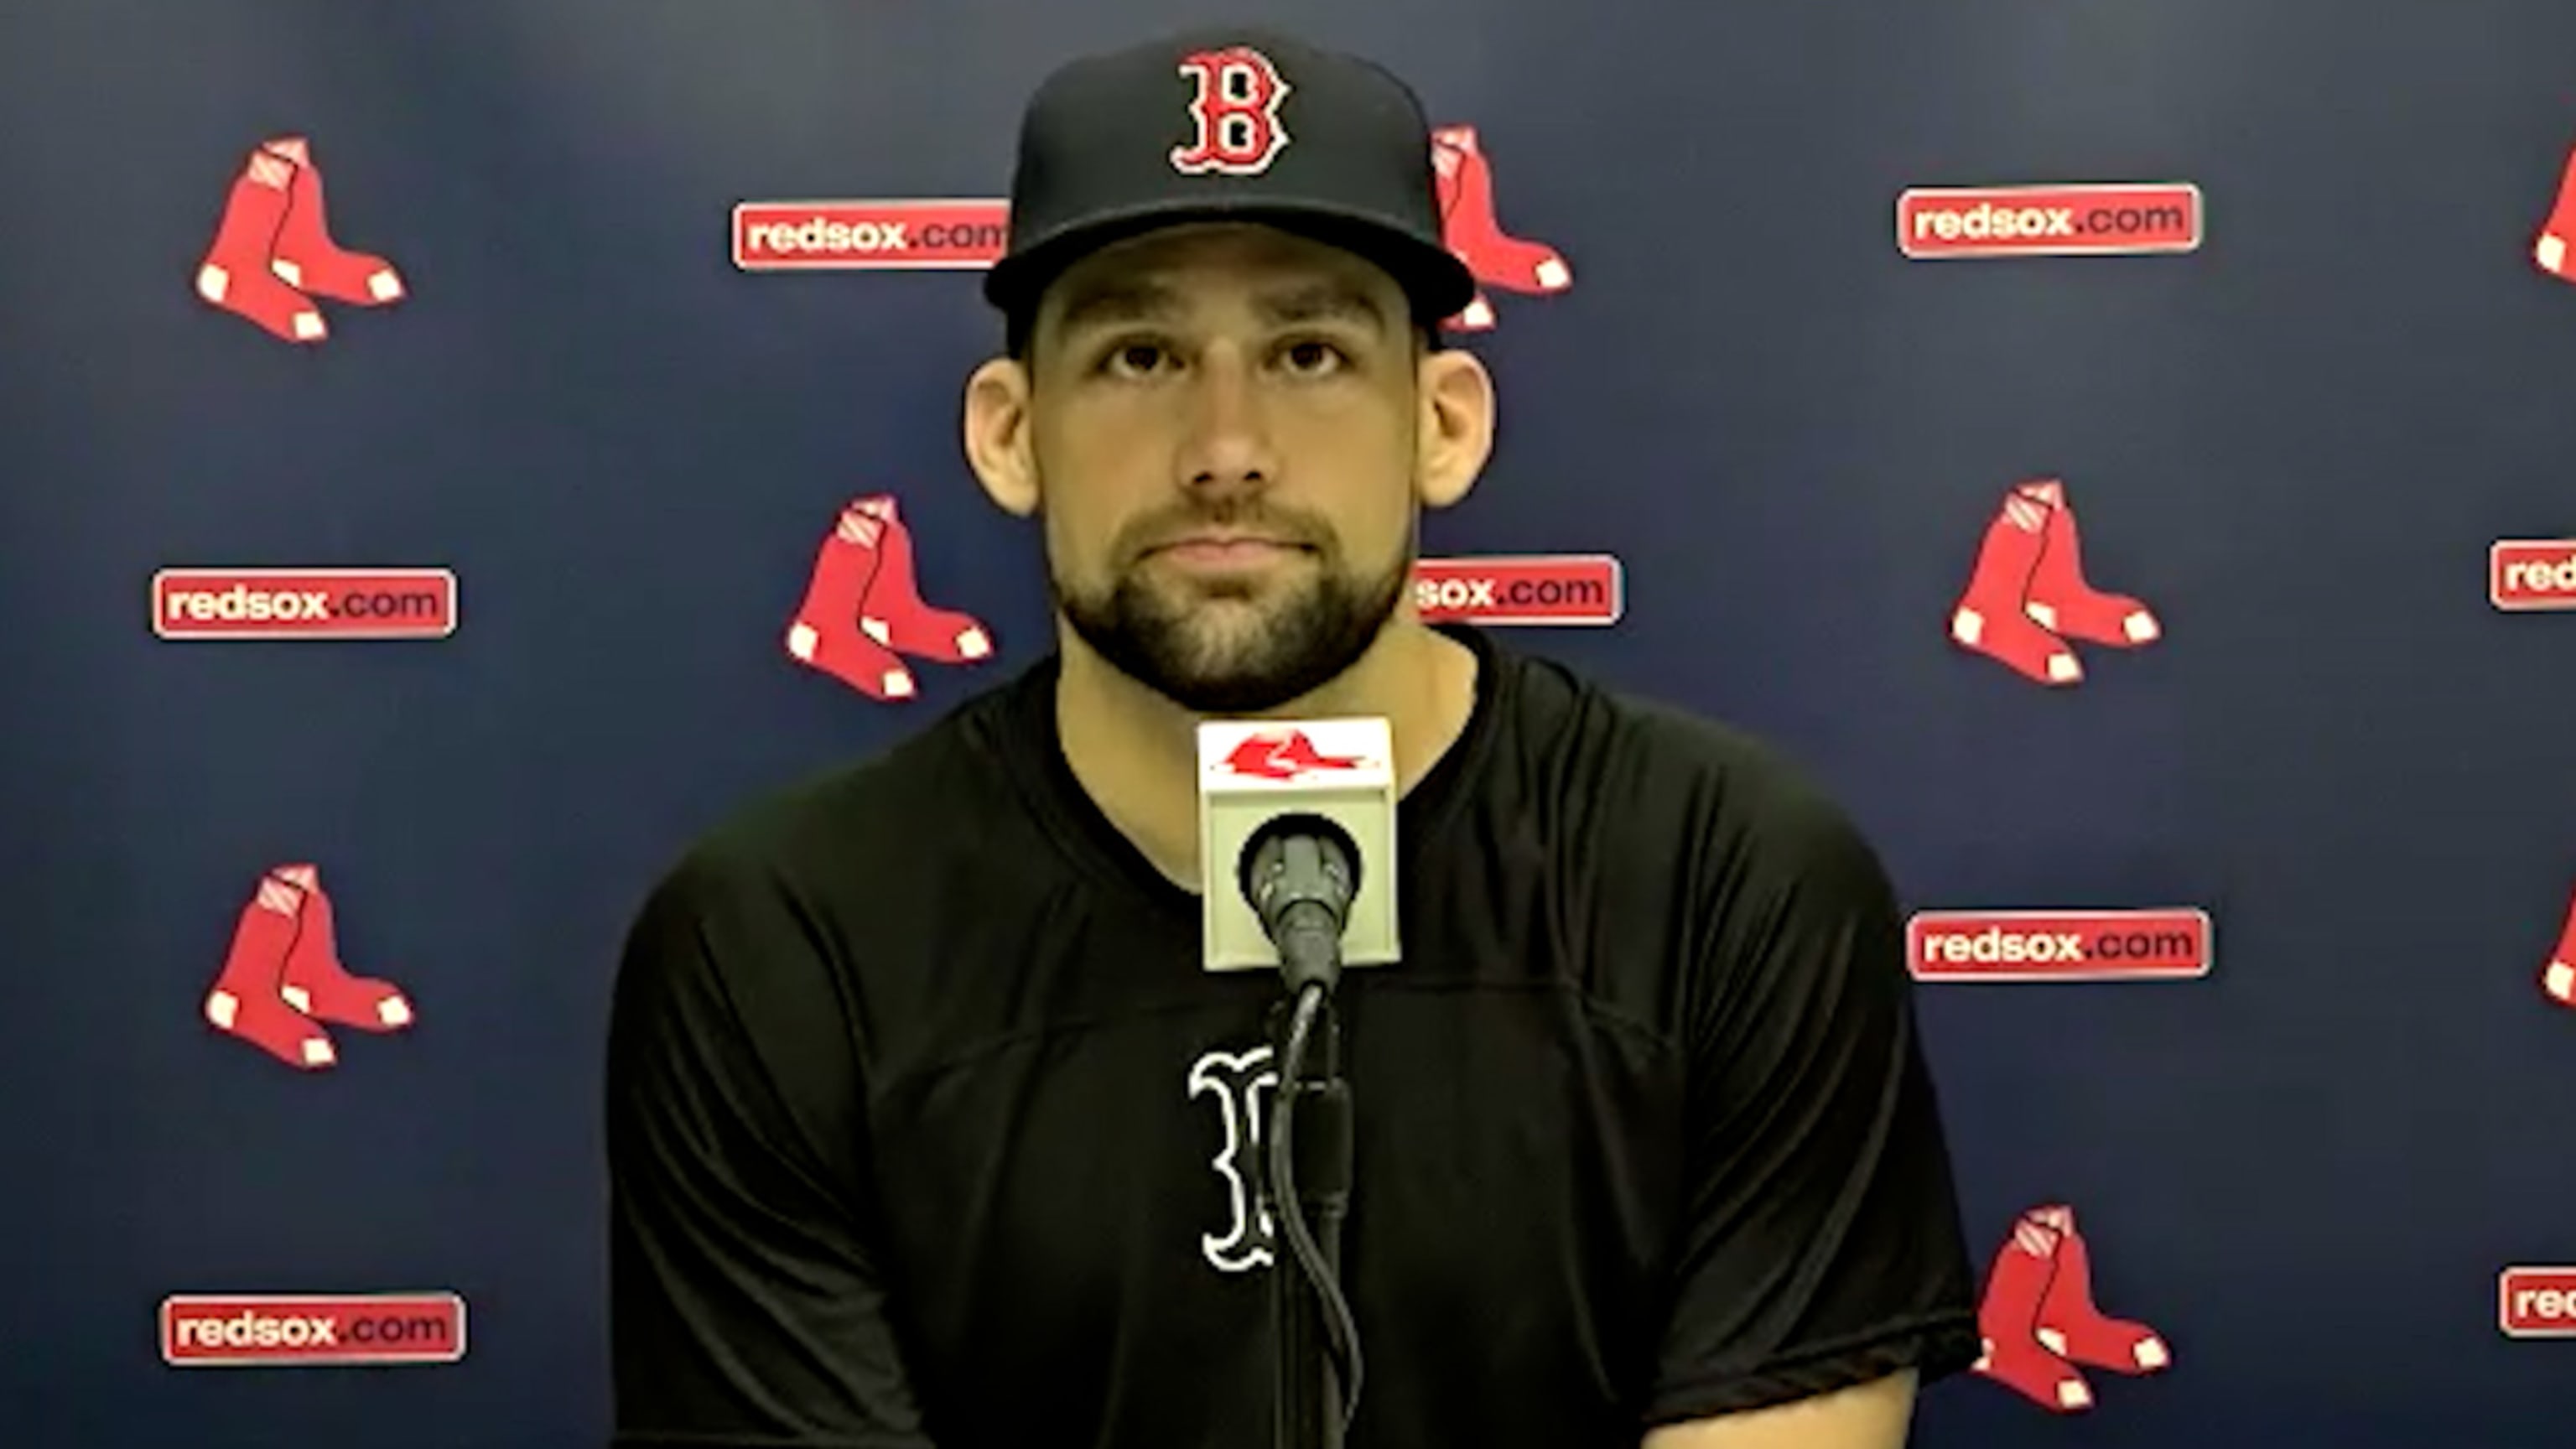 Red Sox rely on Eovaldi in Game 6 with ALCS on the line